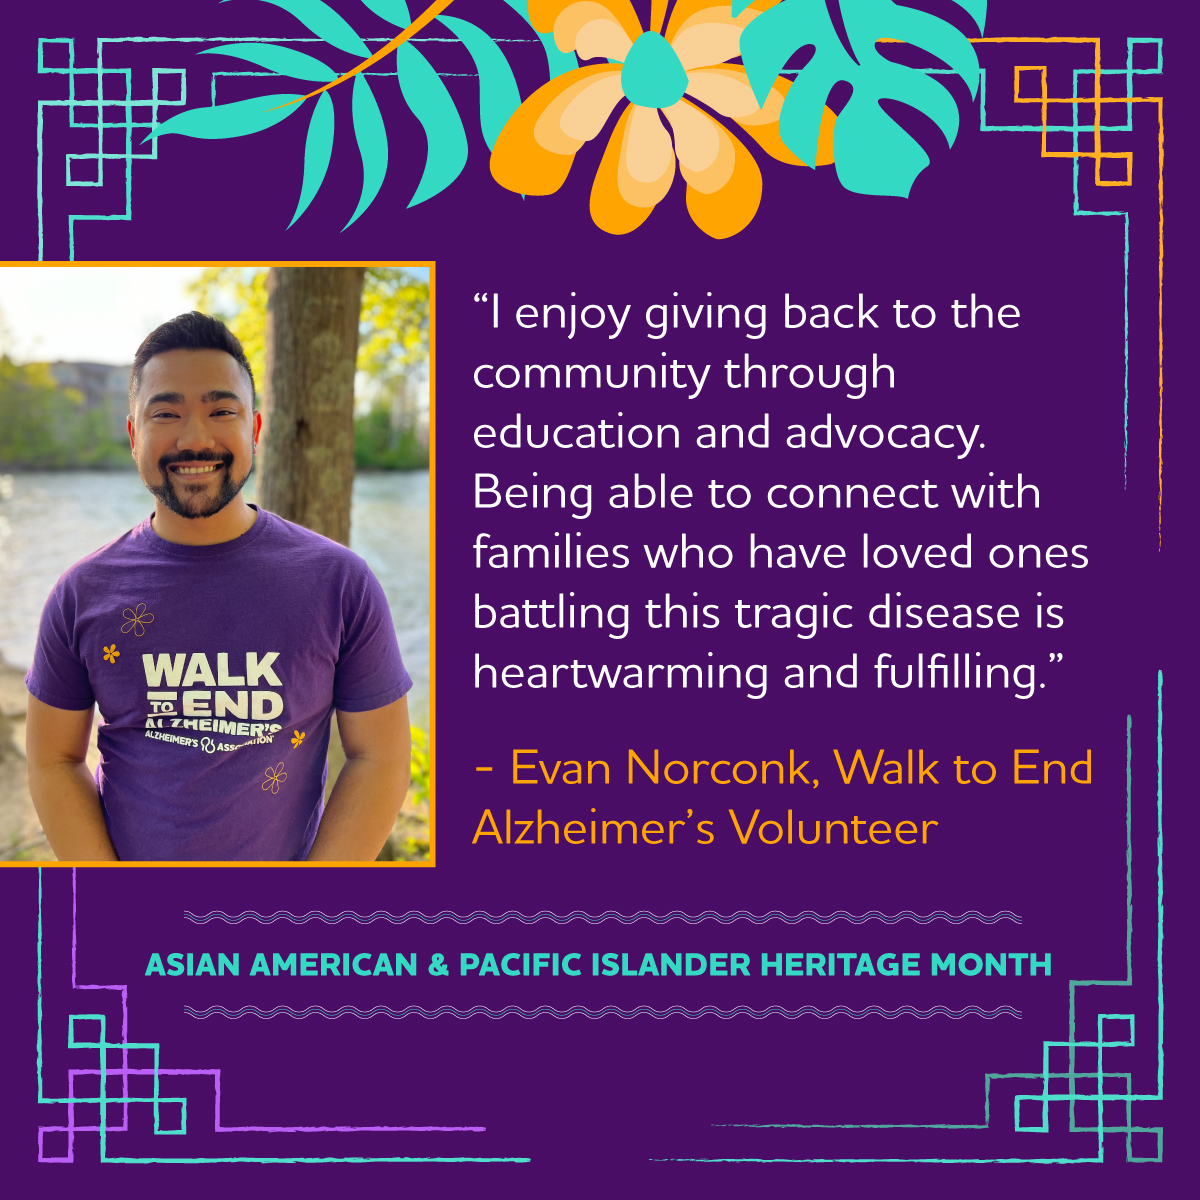 Evan is a voice for those living with Alzheimer’s and other dementia in his community. Through his volunteerism, he is able to connect with others while raising important funds and awareness to #ENDALZ through Walk to End Alzheimer’s. #AAPIMonth